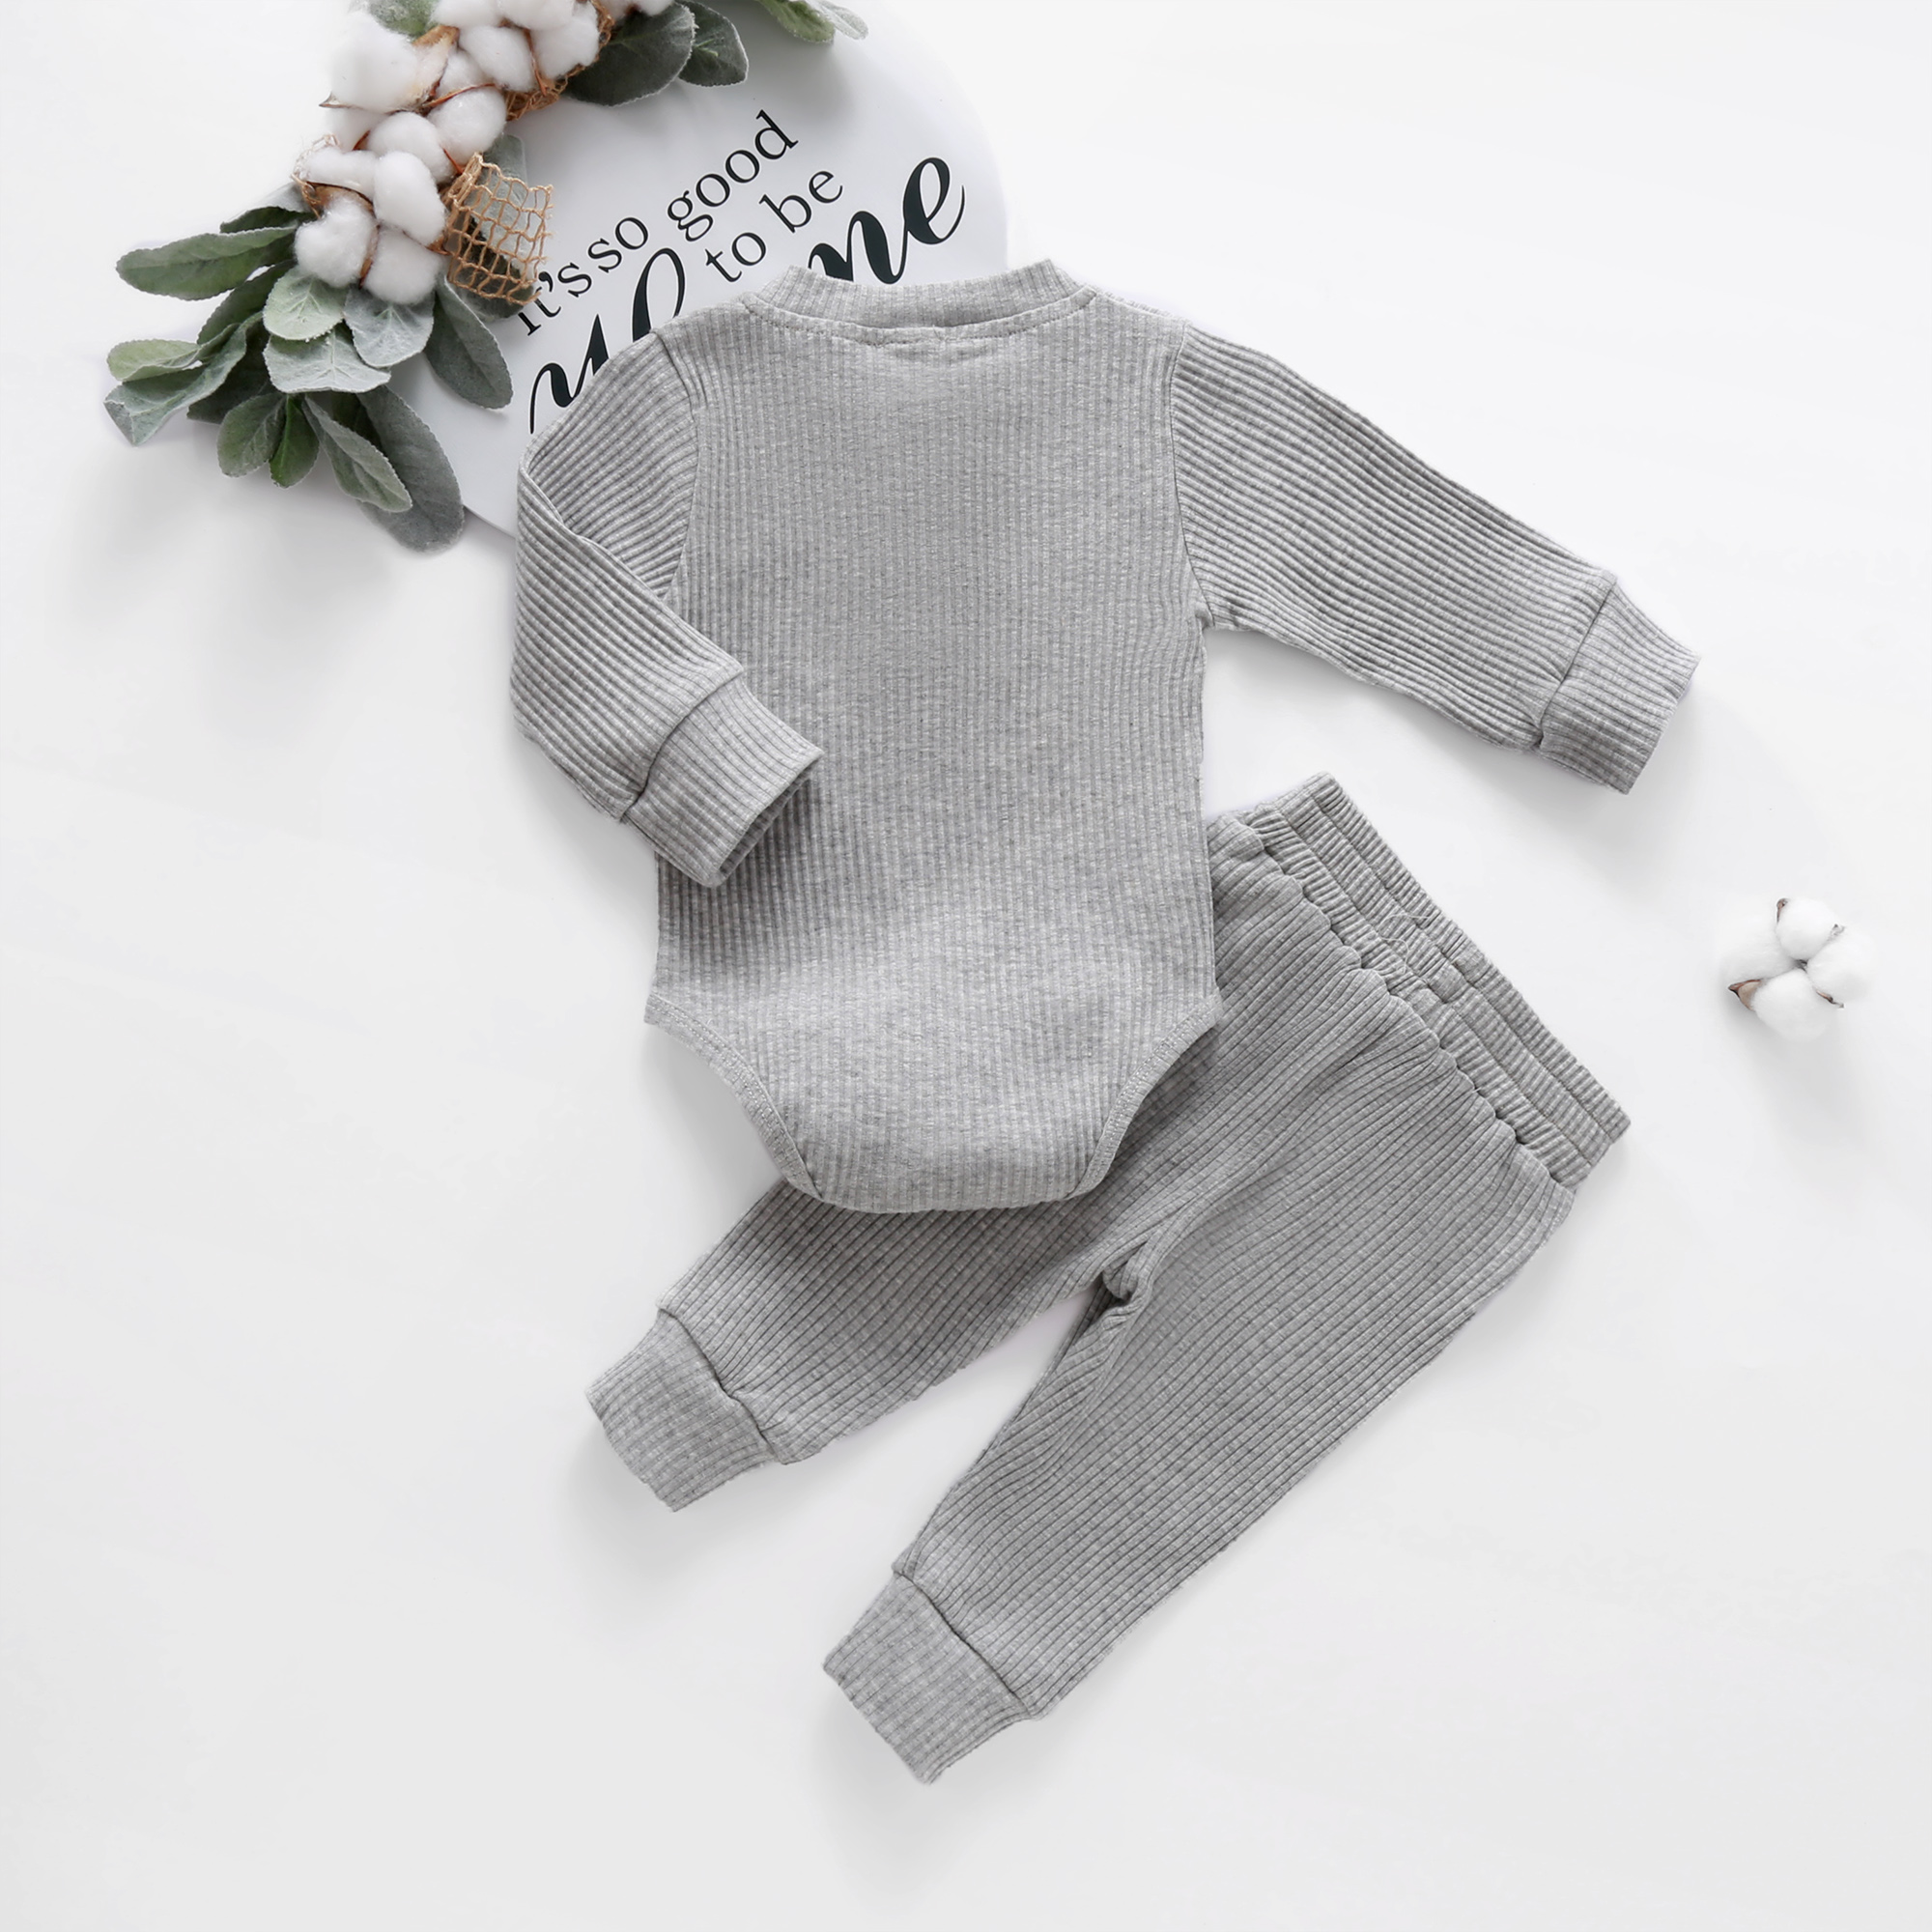 jaweiw Baby Girl Boy Fall Clothes 3 6 12 18 24 Months Outfits Long Sleeve Knitted Cotton Romper Pants Infant Winter Sets - image 5 of 9